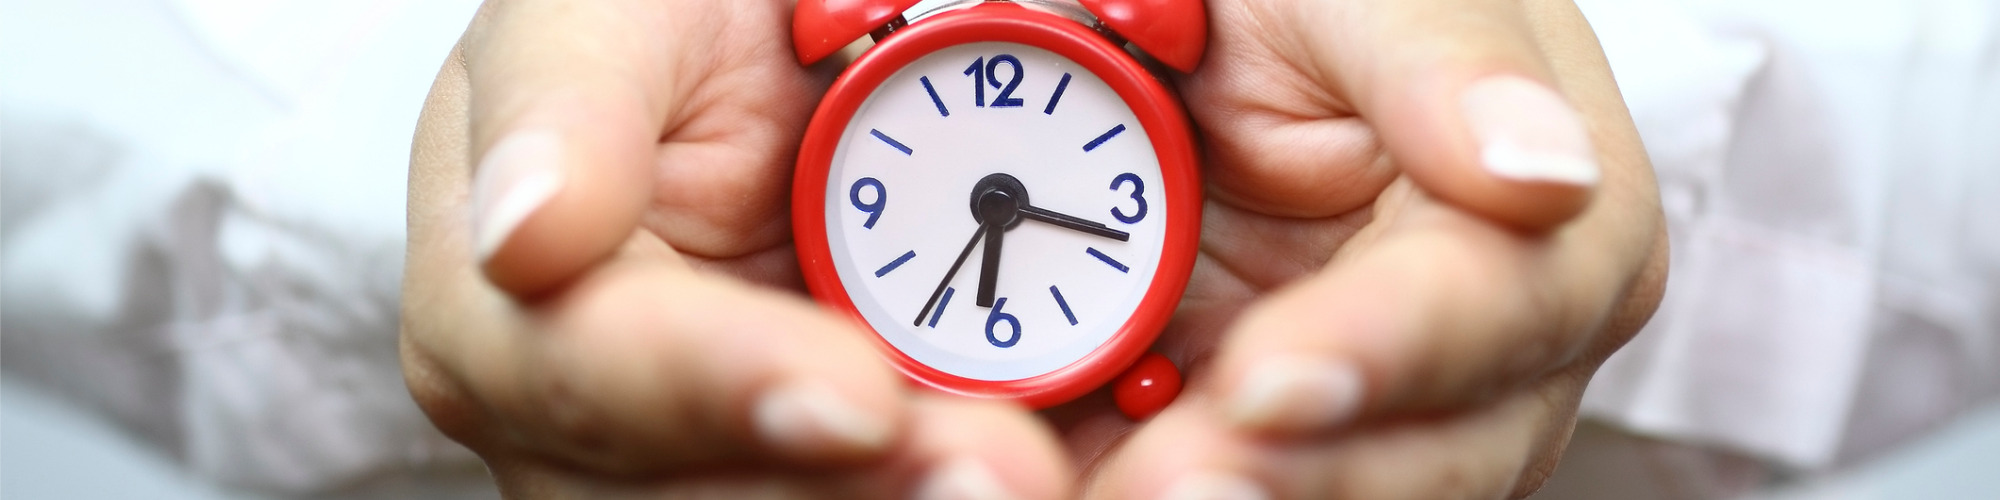 Time Management - How to Take Back Control of Your Day